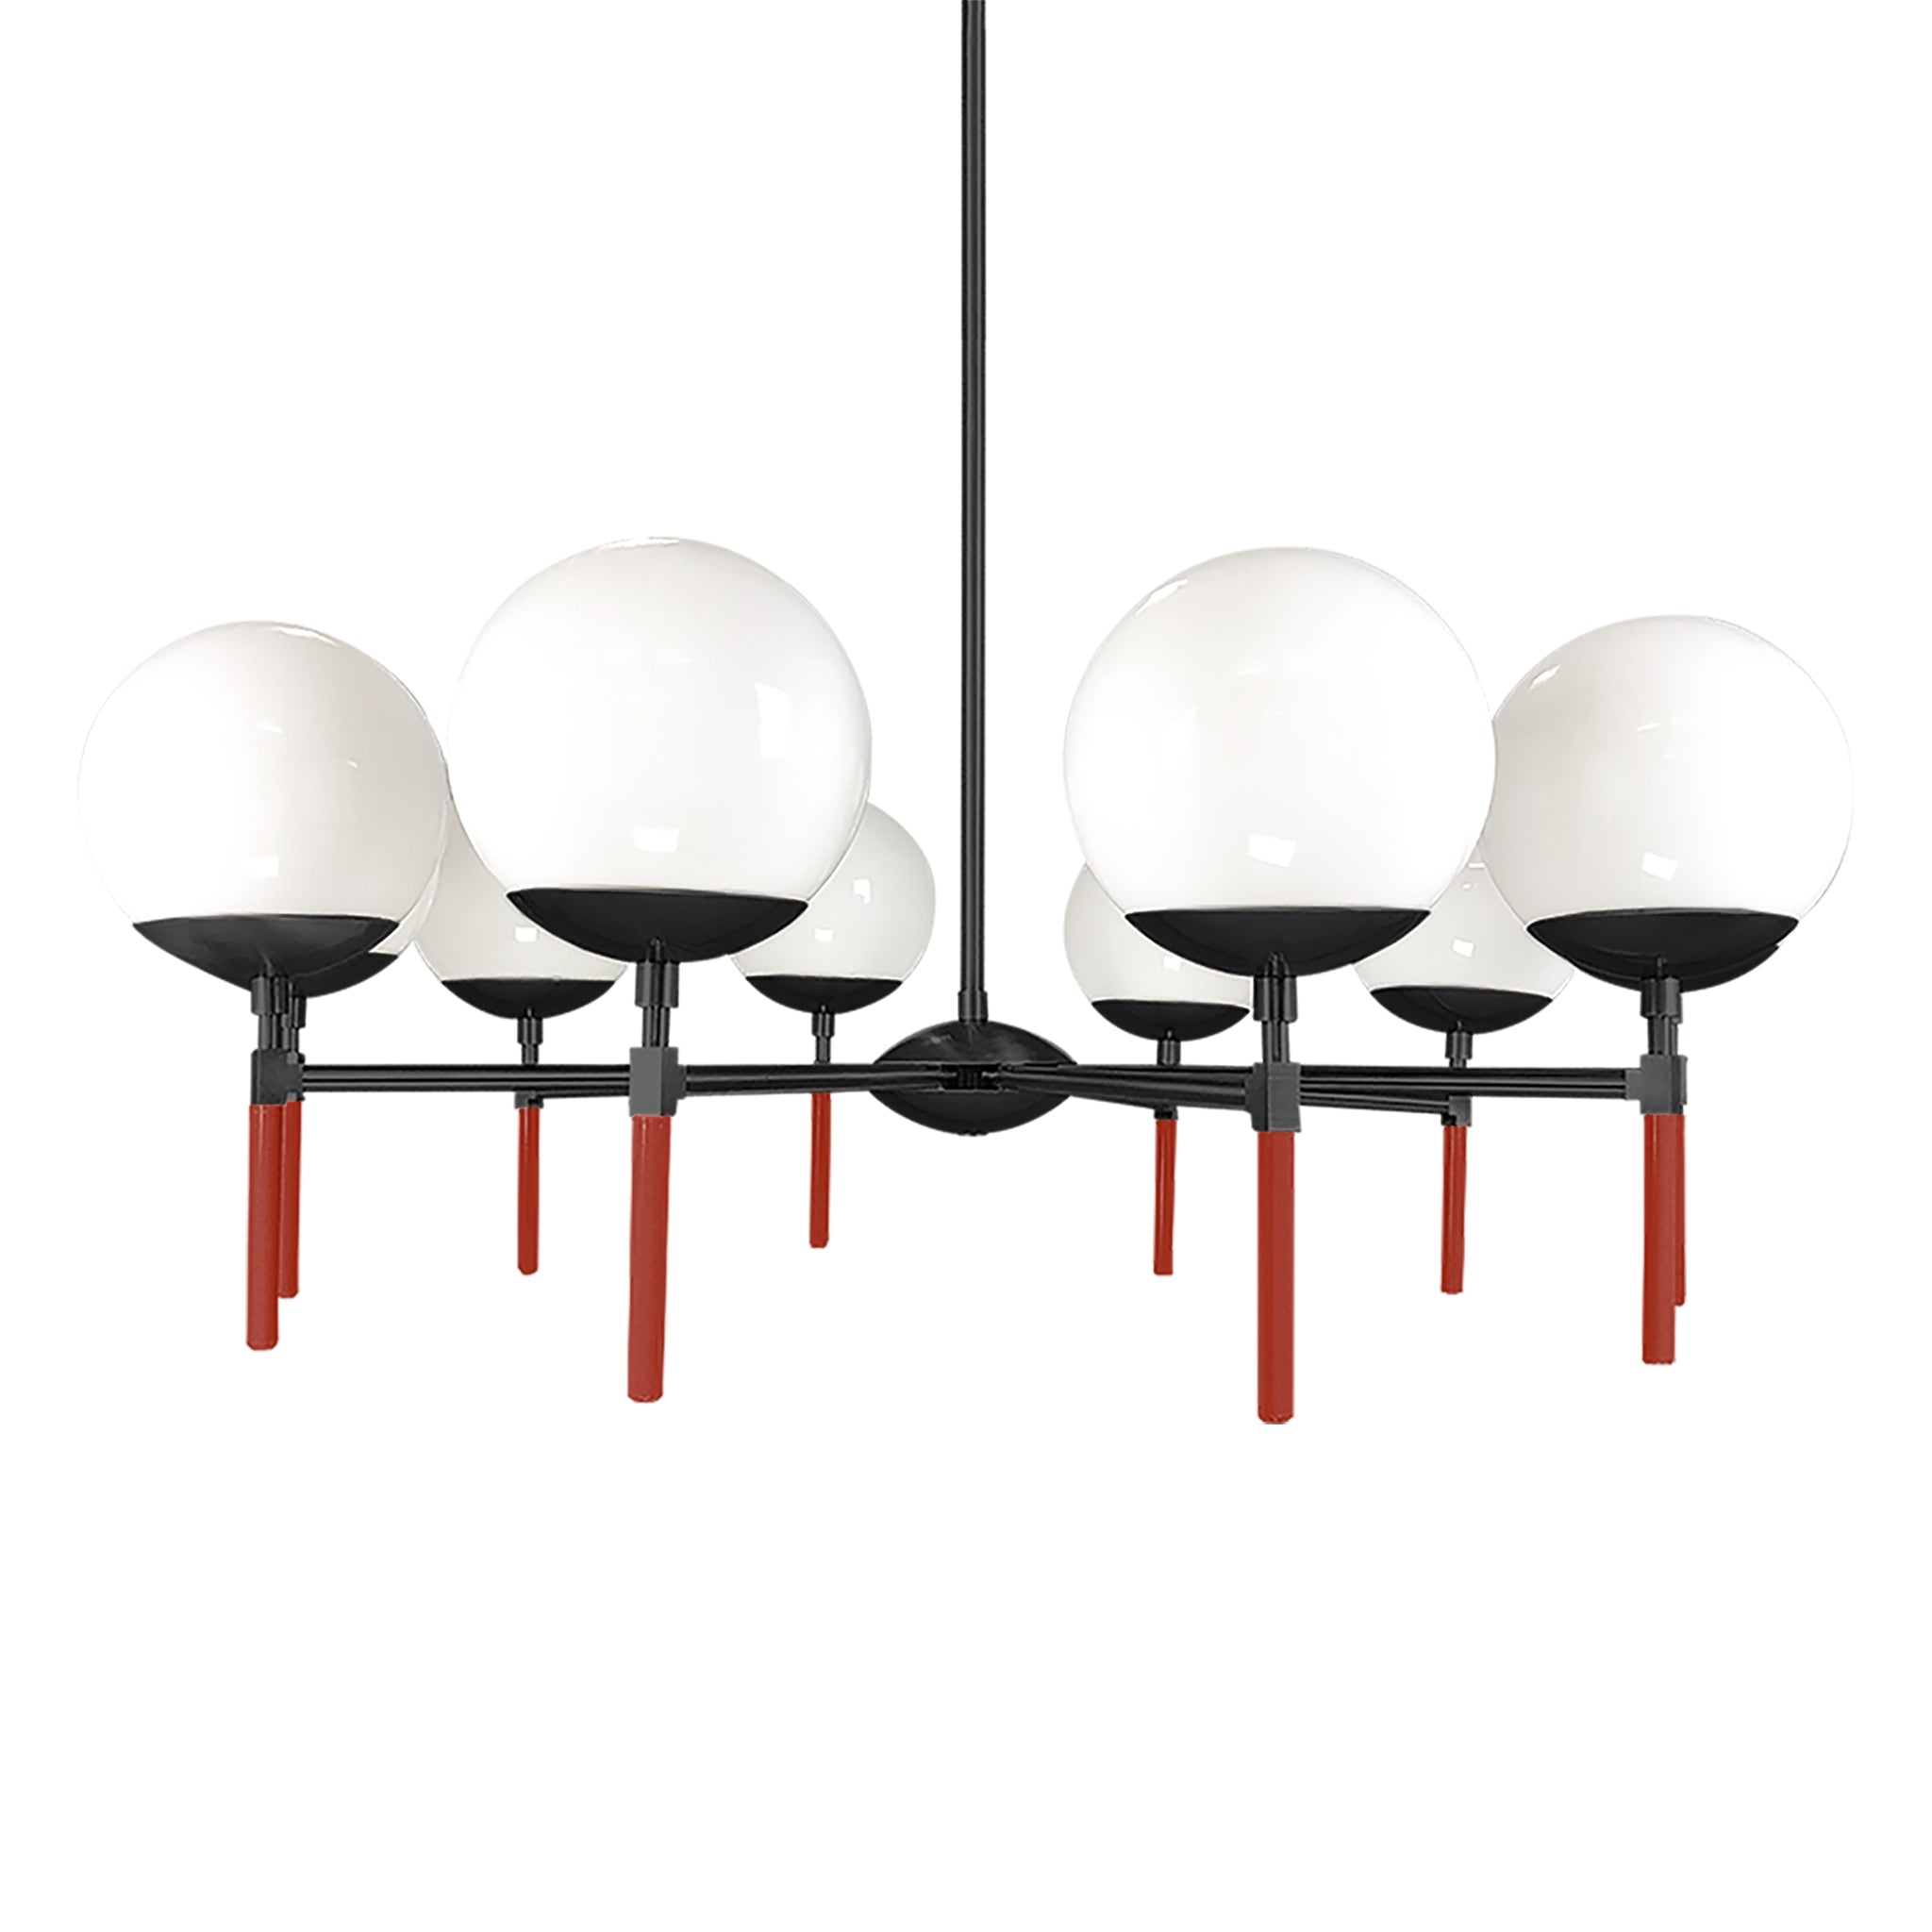 Black and riding hood red color Lolli chandelier 36" Dutton Brown lighting